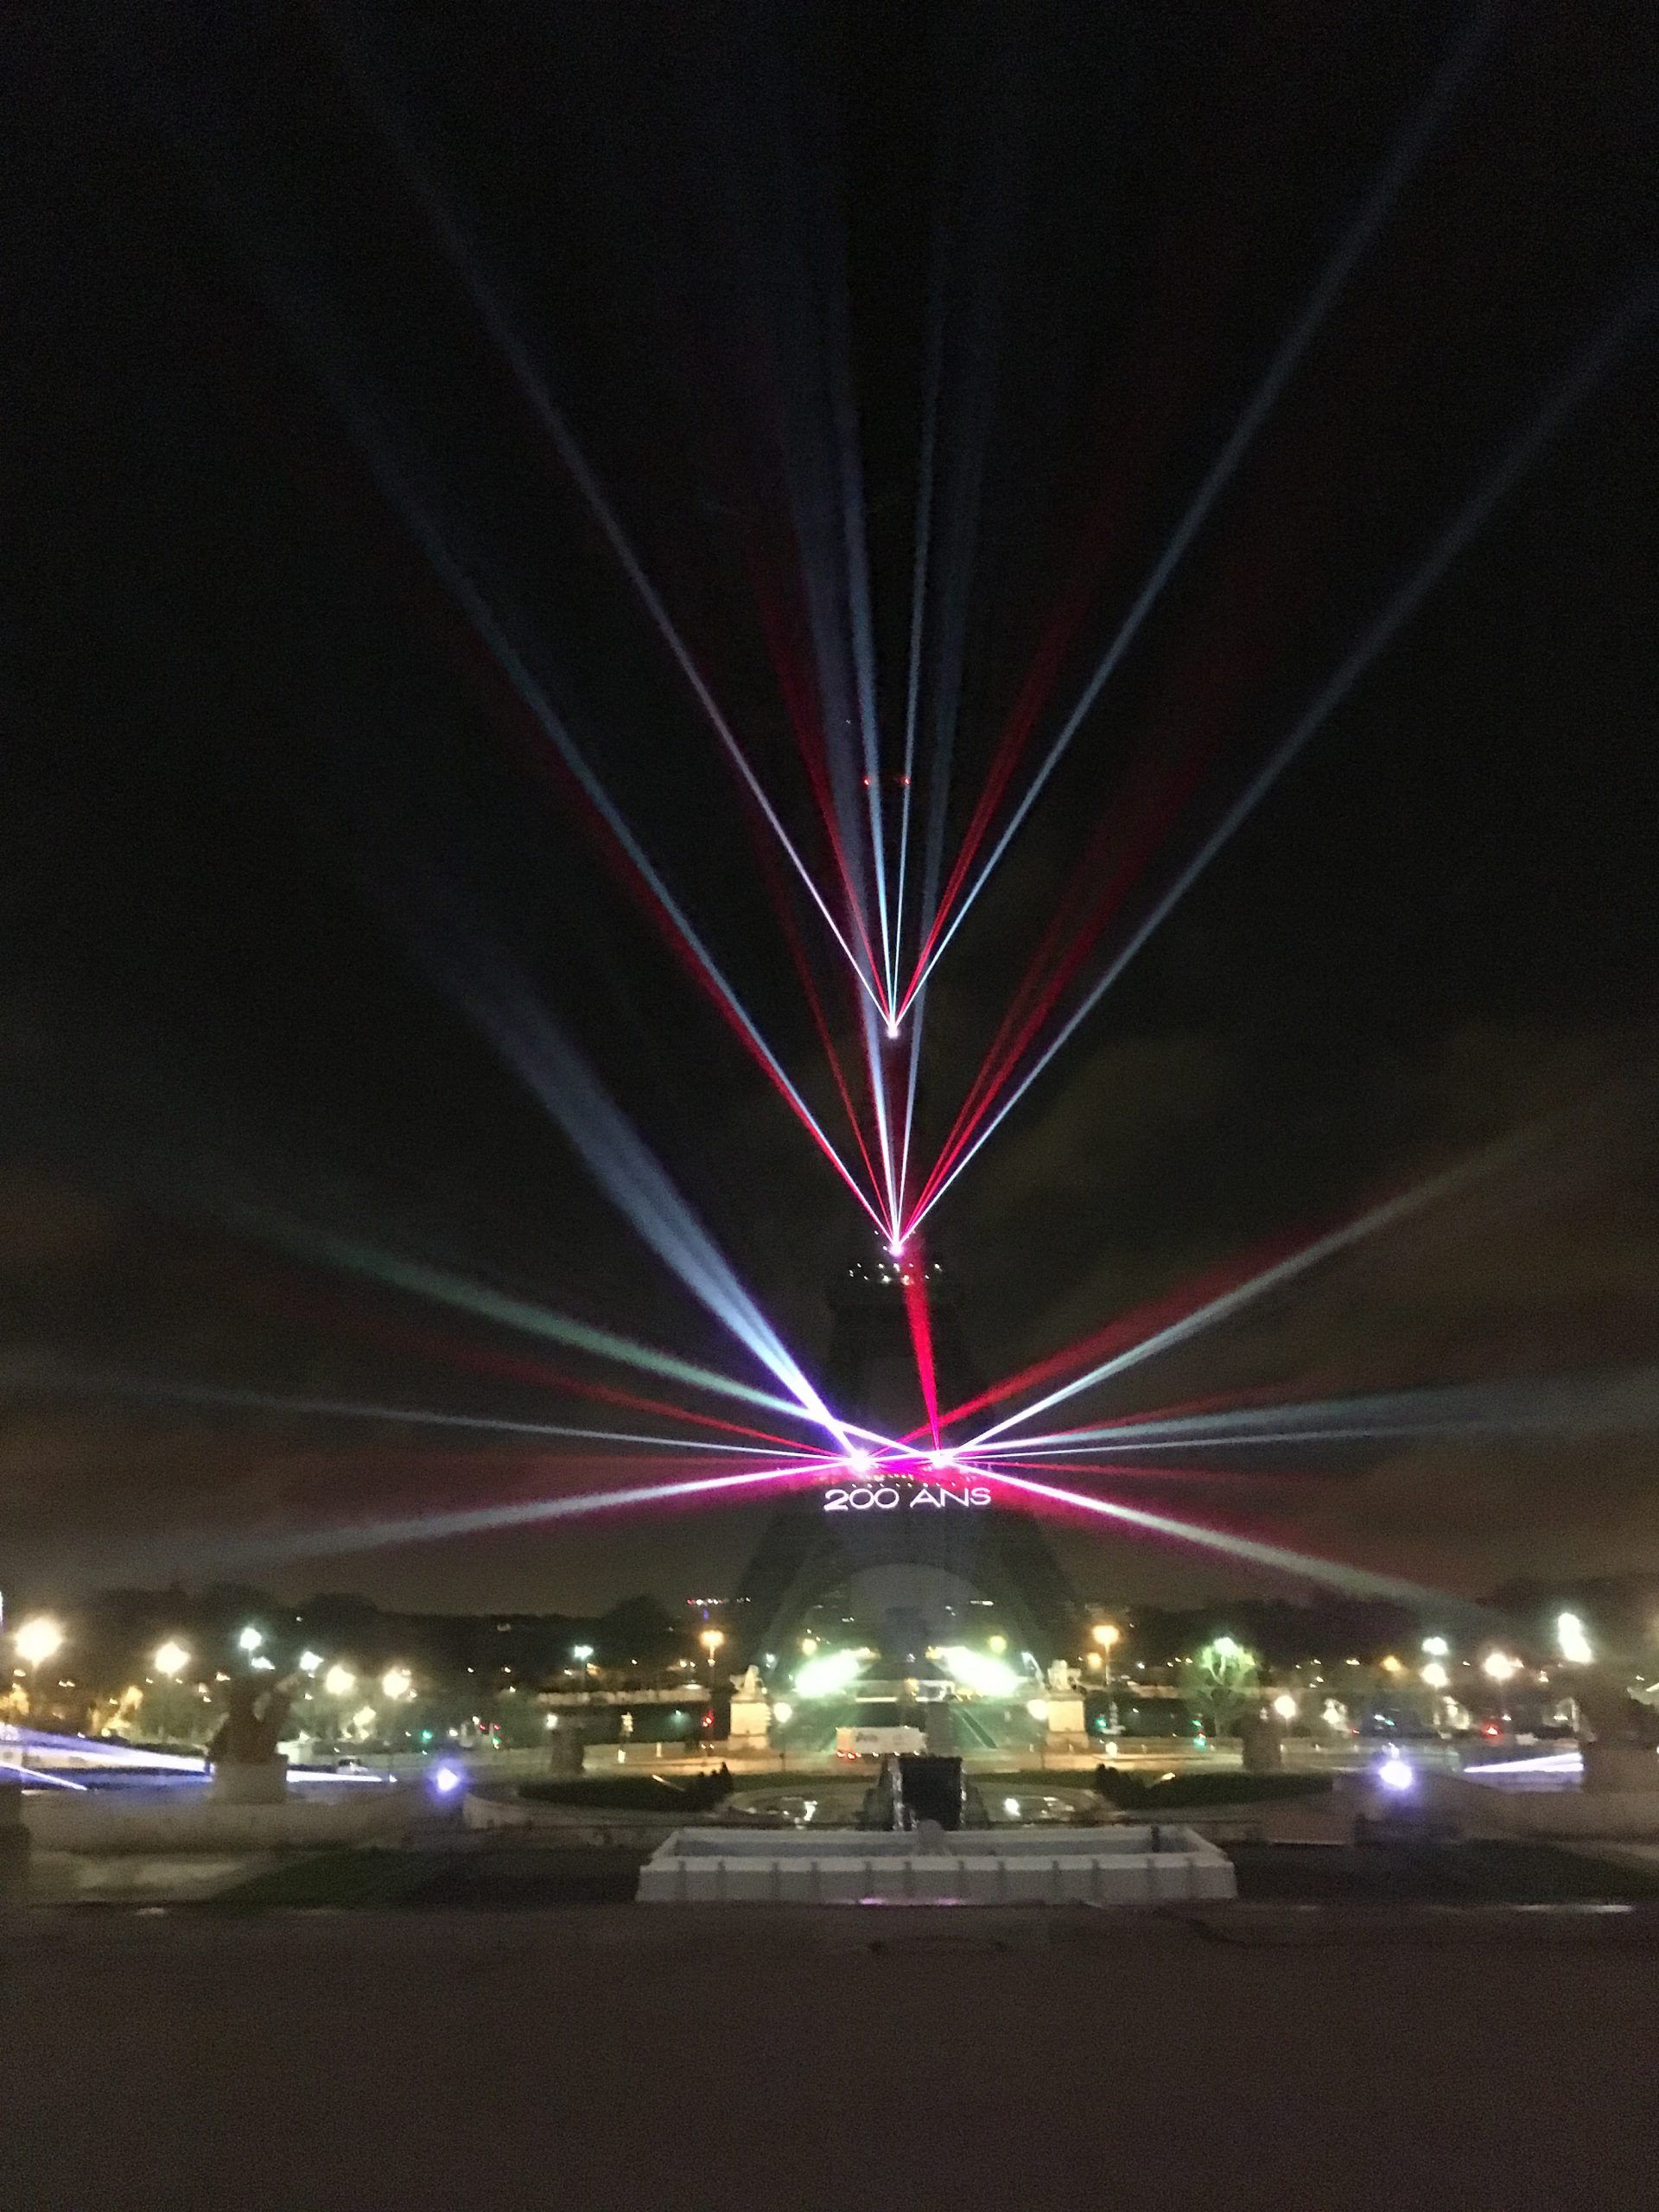 Photo of the Eiffel Tower with 200 years written on it and red and white laser beams